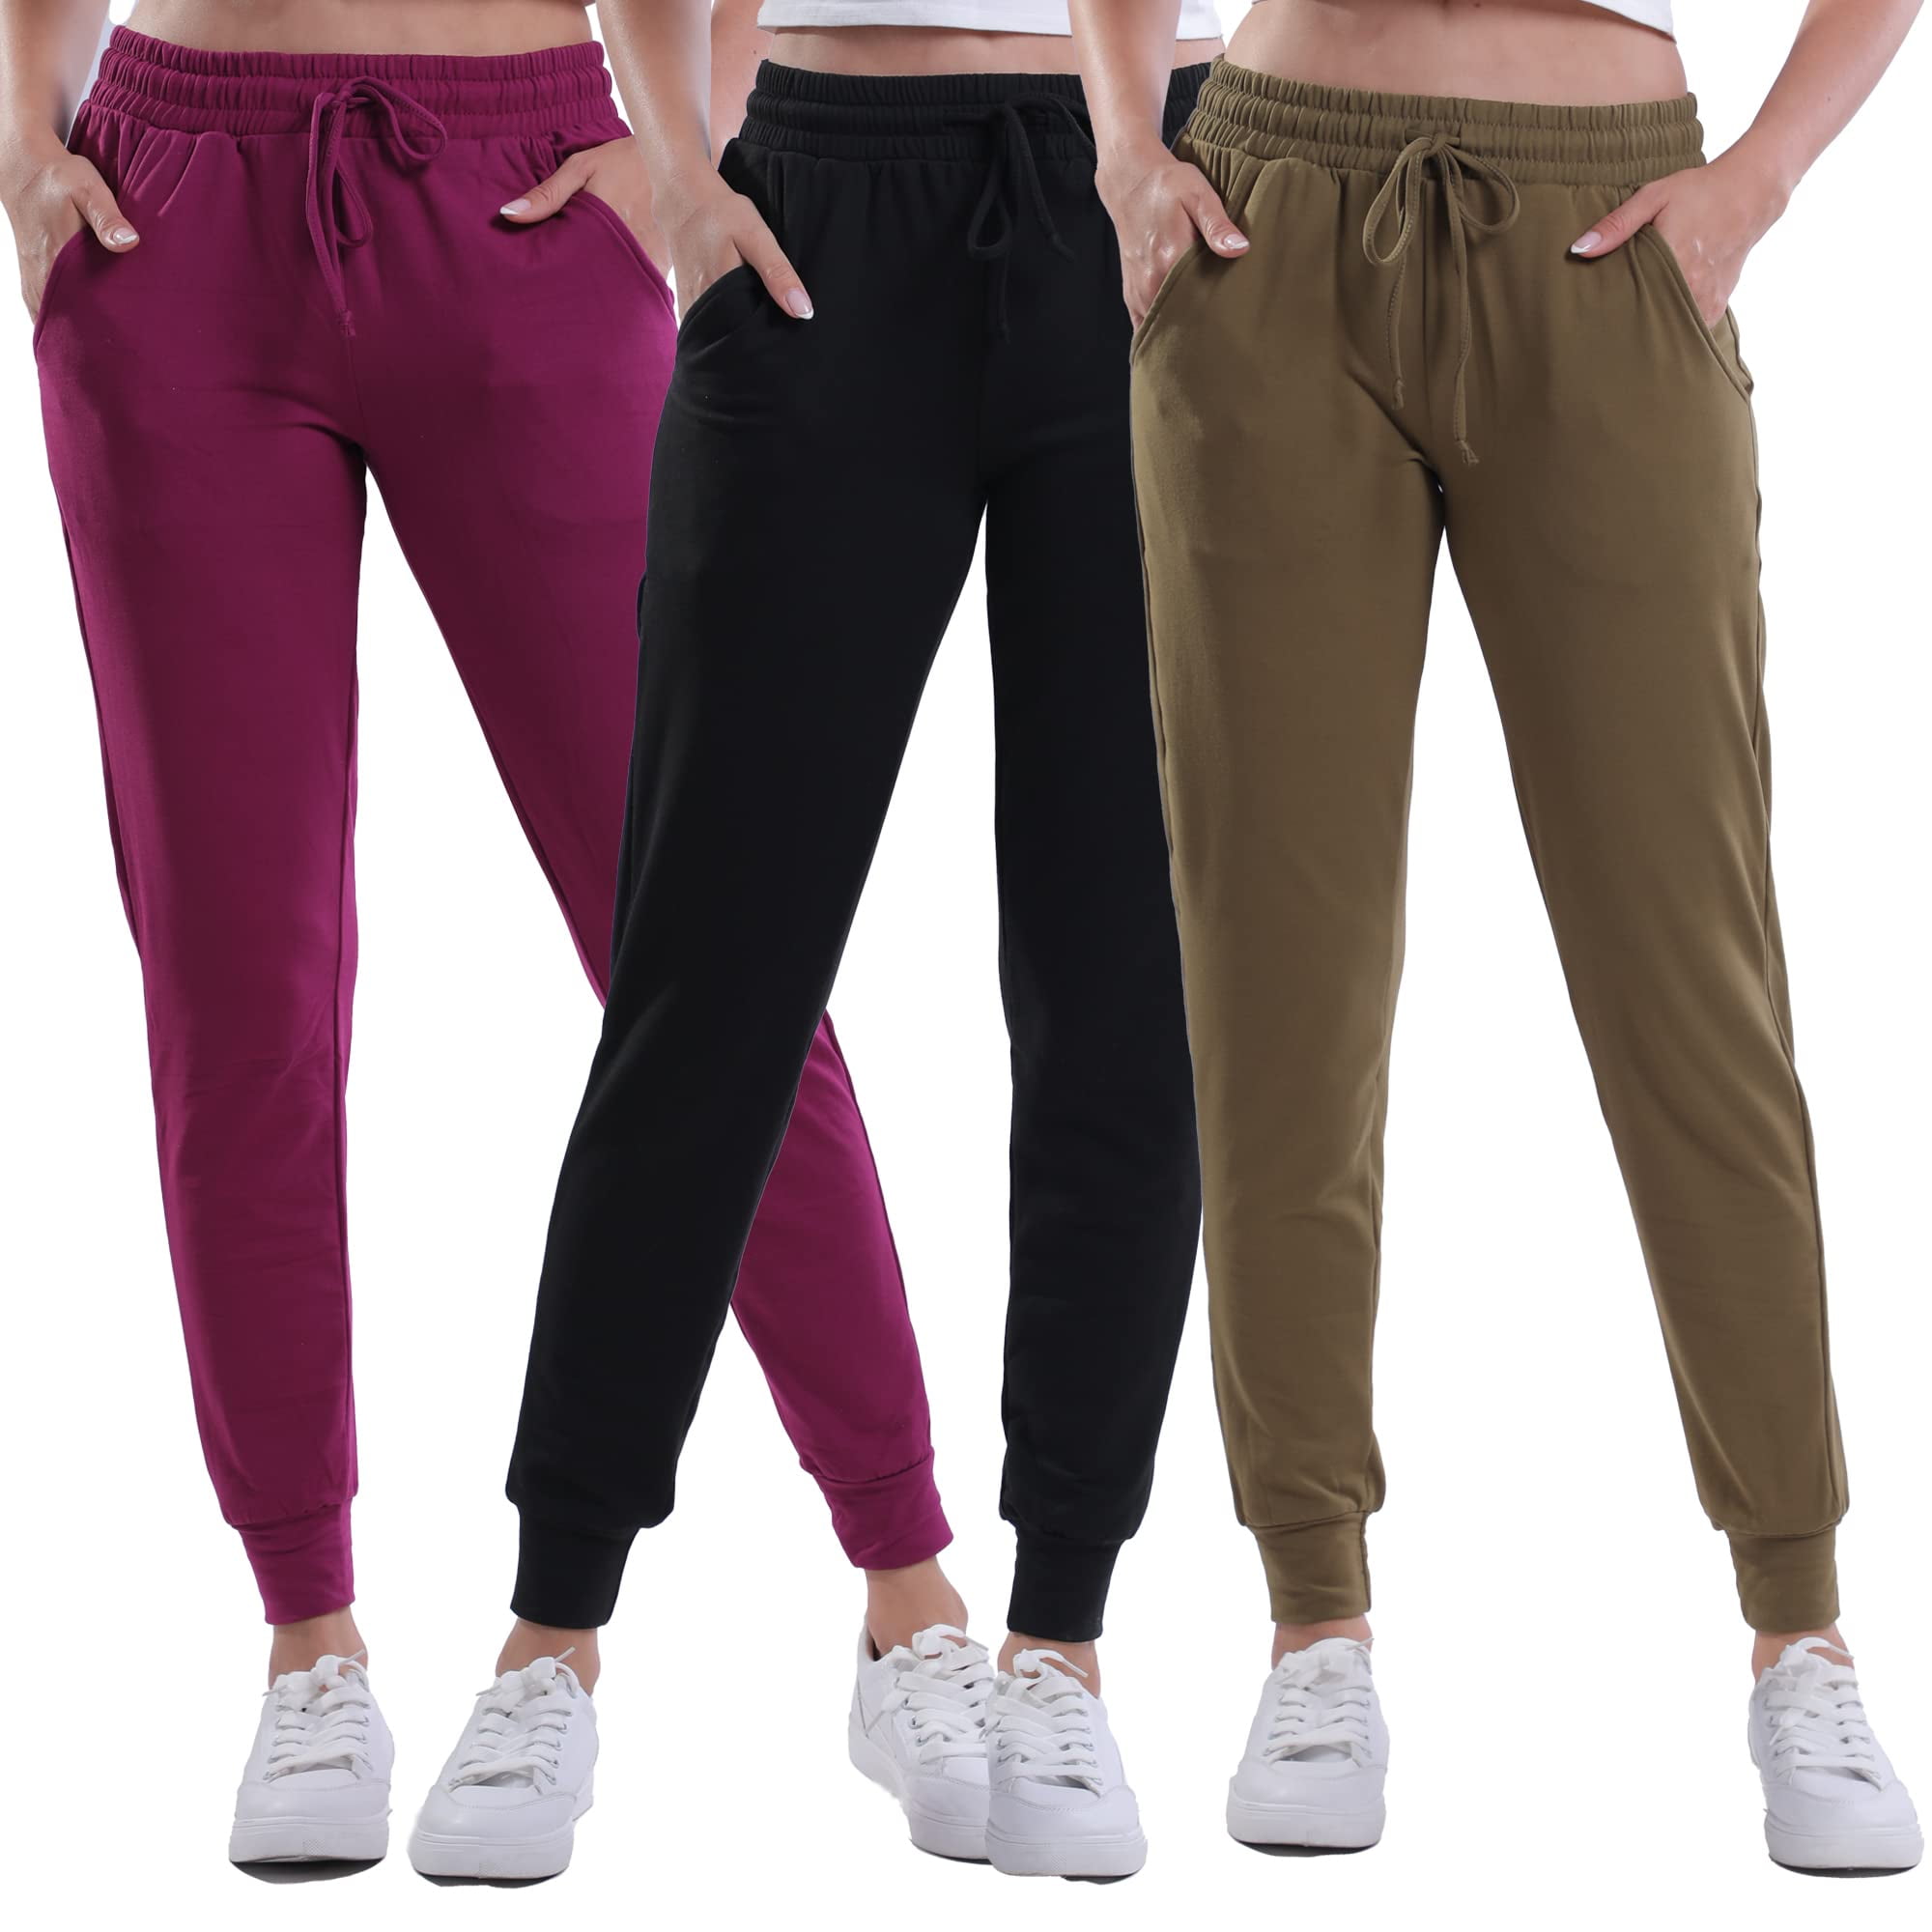 C Crush Joggers for Women with Pockets-Relaxed Fit Sweatpants